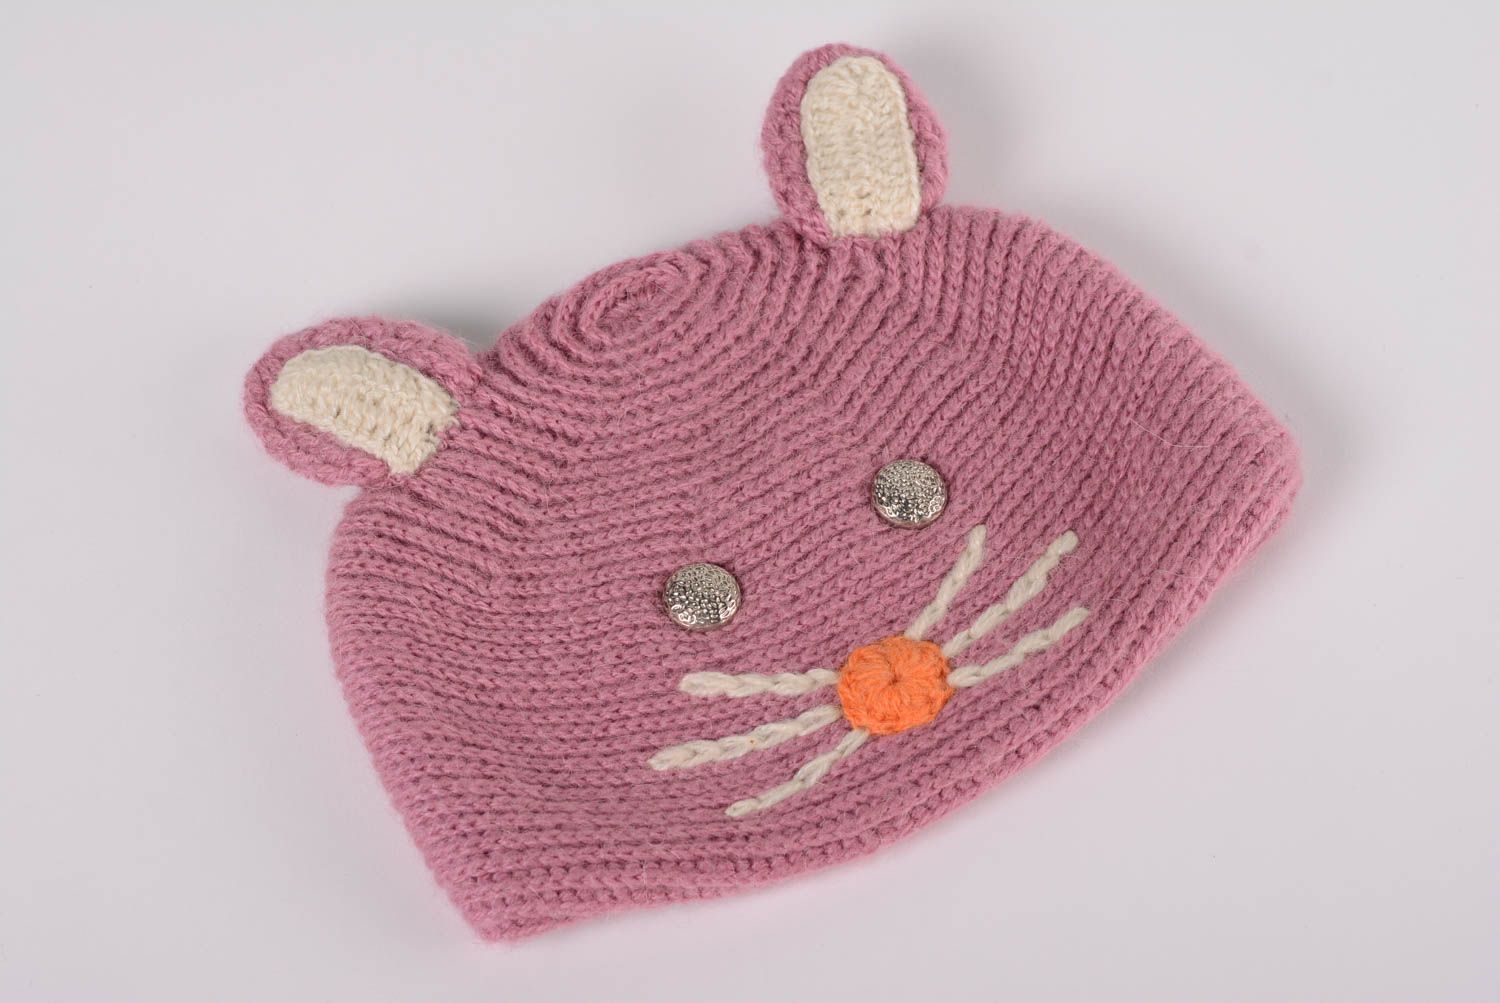 Handmade funny animal hat knitted of pink woolen threads with ears for baby Cat photo 5